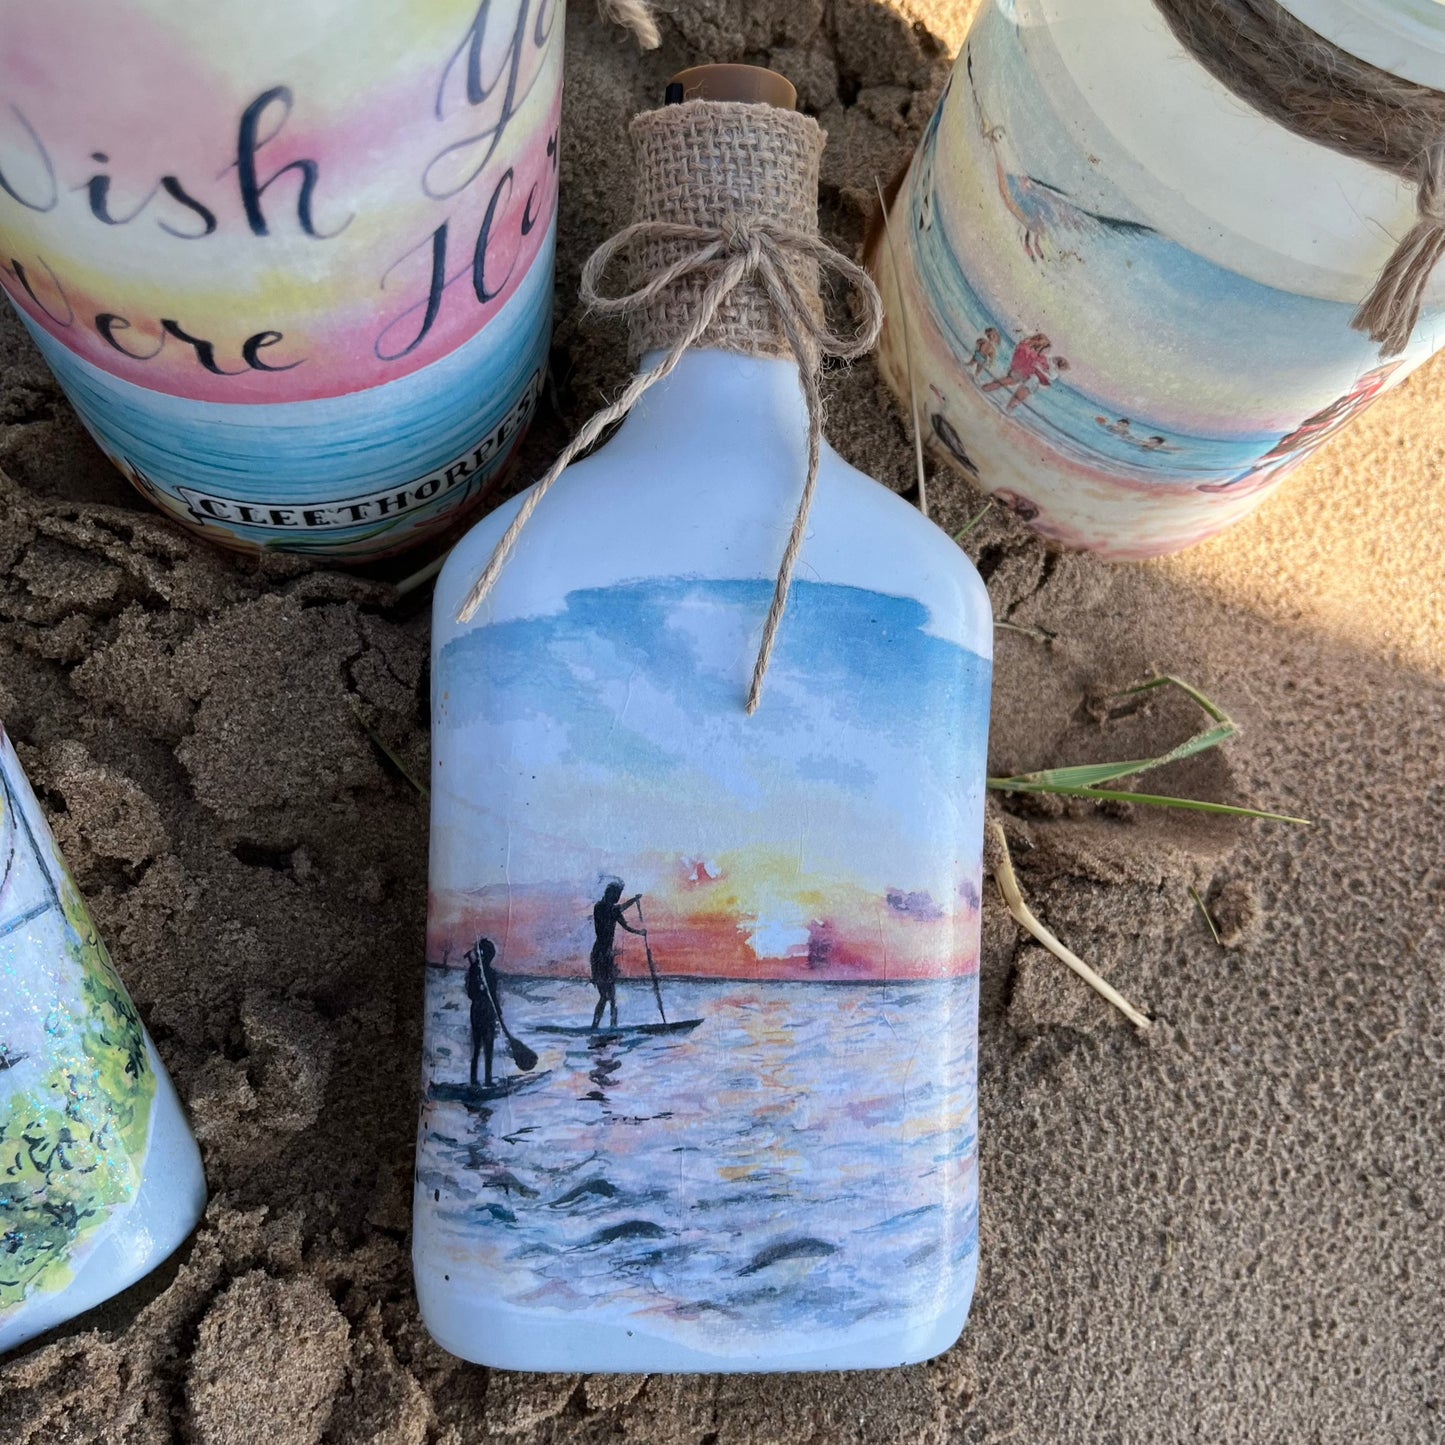 A decoupaged jar on Cleethorpes beach, featuring watercolour artwork of paddleboarders at sunrise by Eve Leoni Smith and Jollypotz.